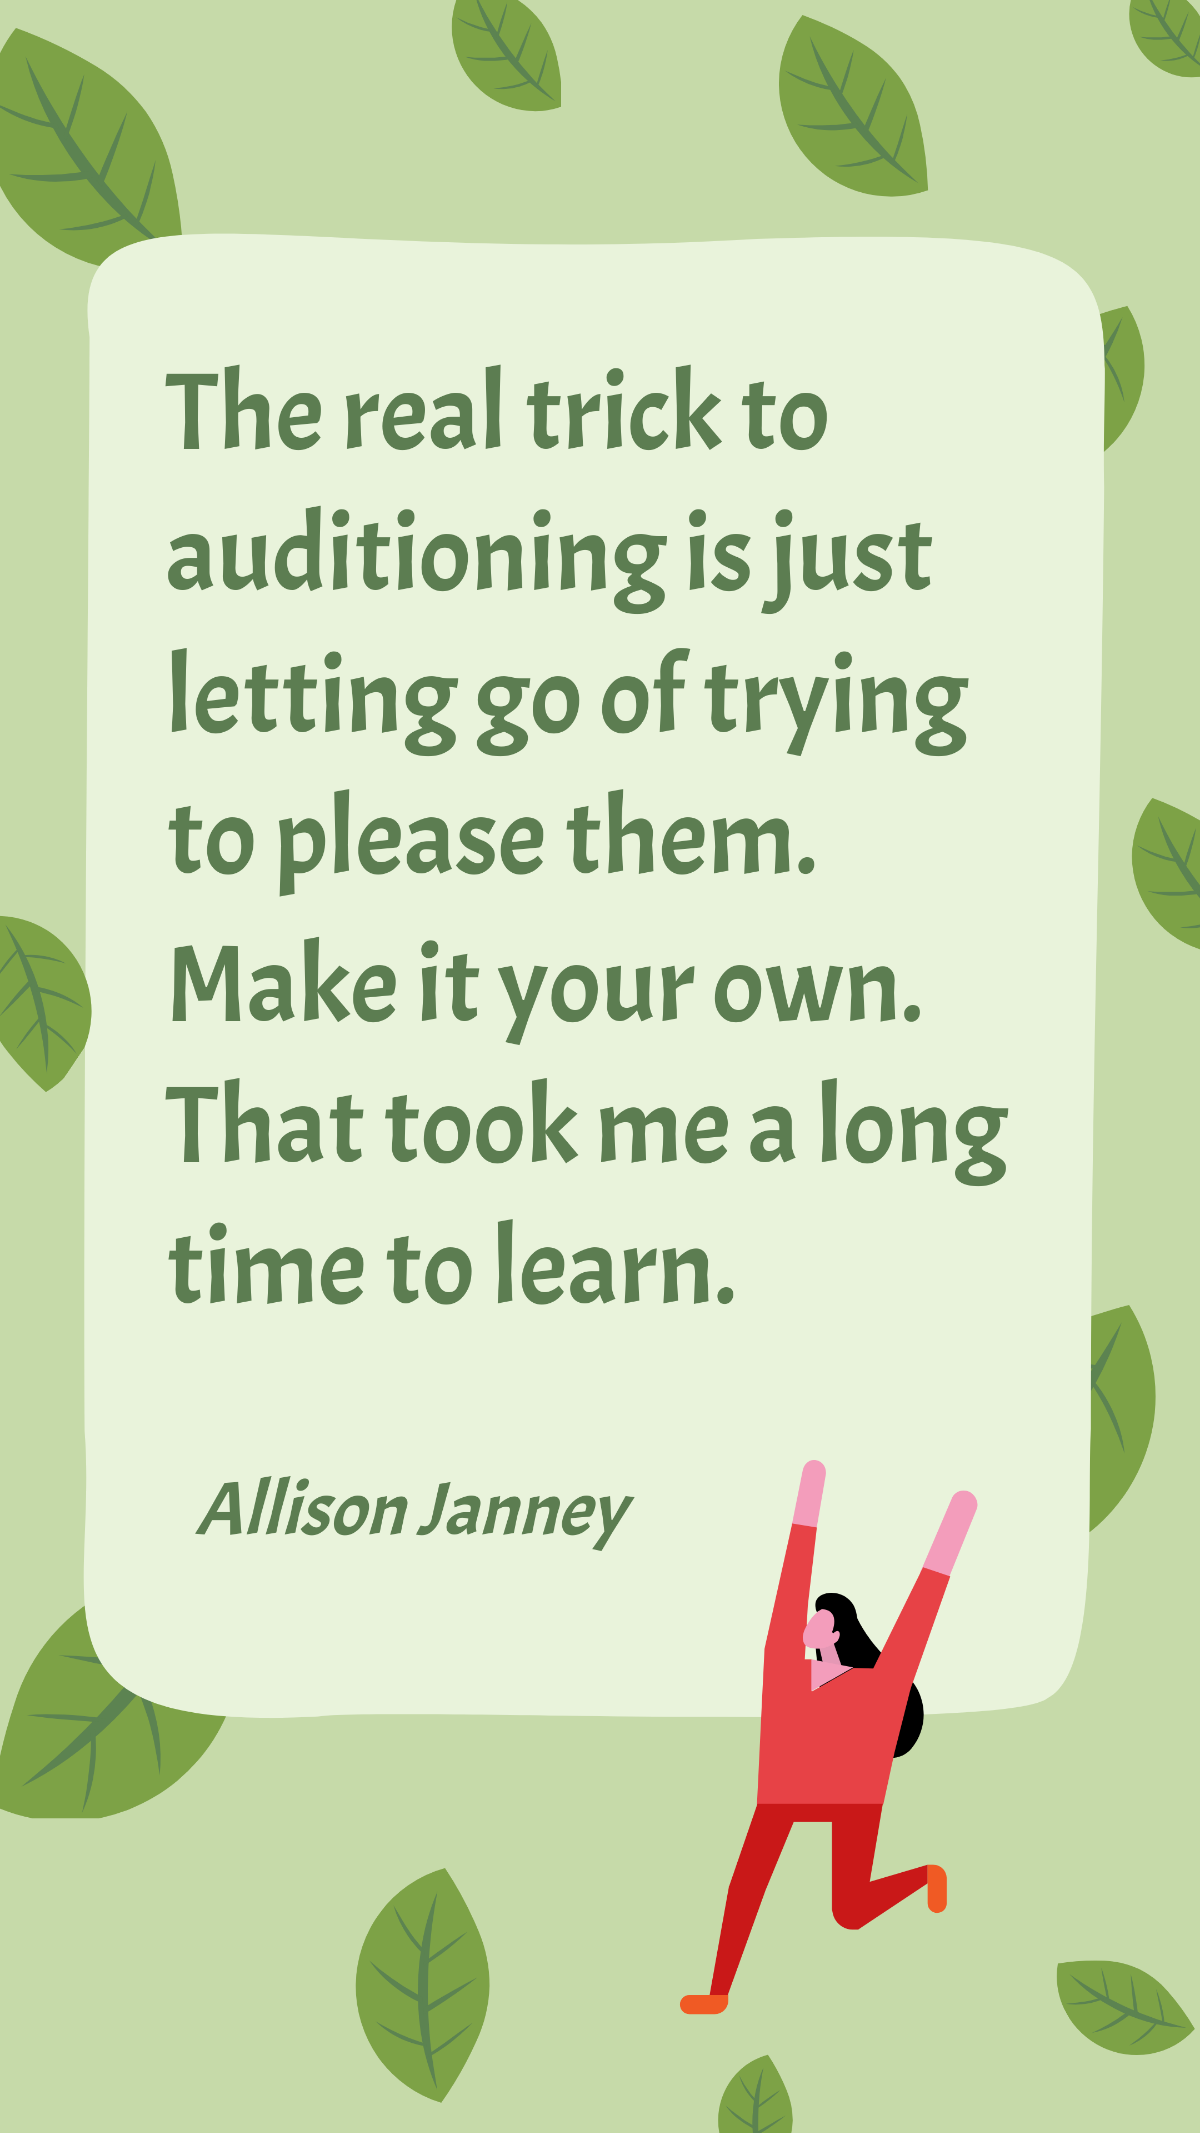 Allison Janney - The real trick to auditioning is just letting go of trying to please them. Make it your own. That took me a long time to learn. Template